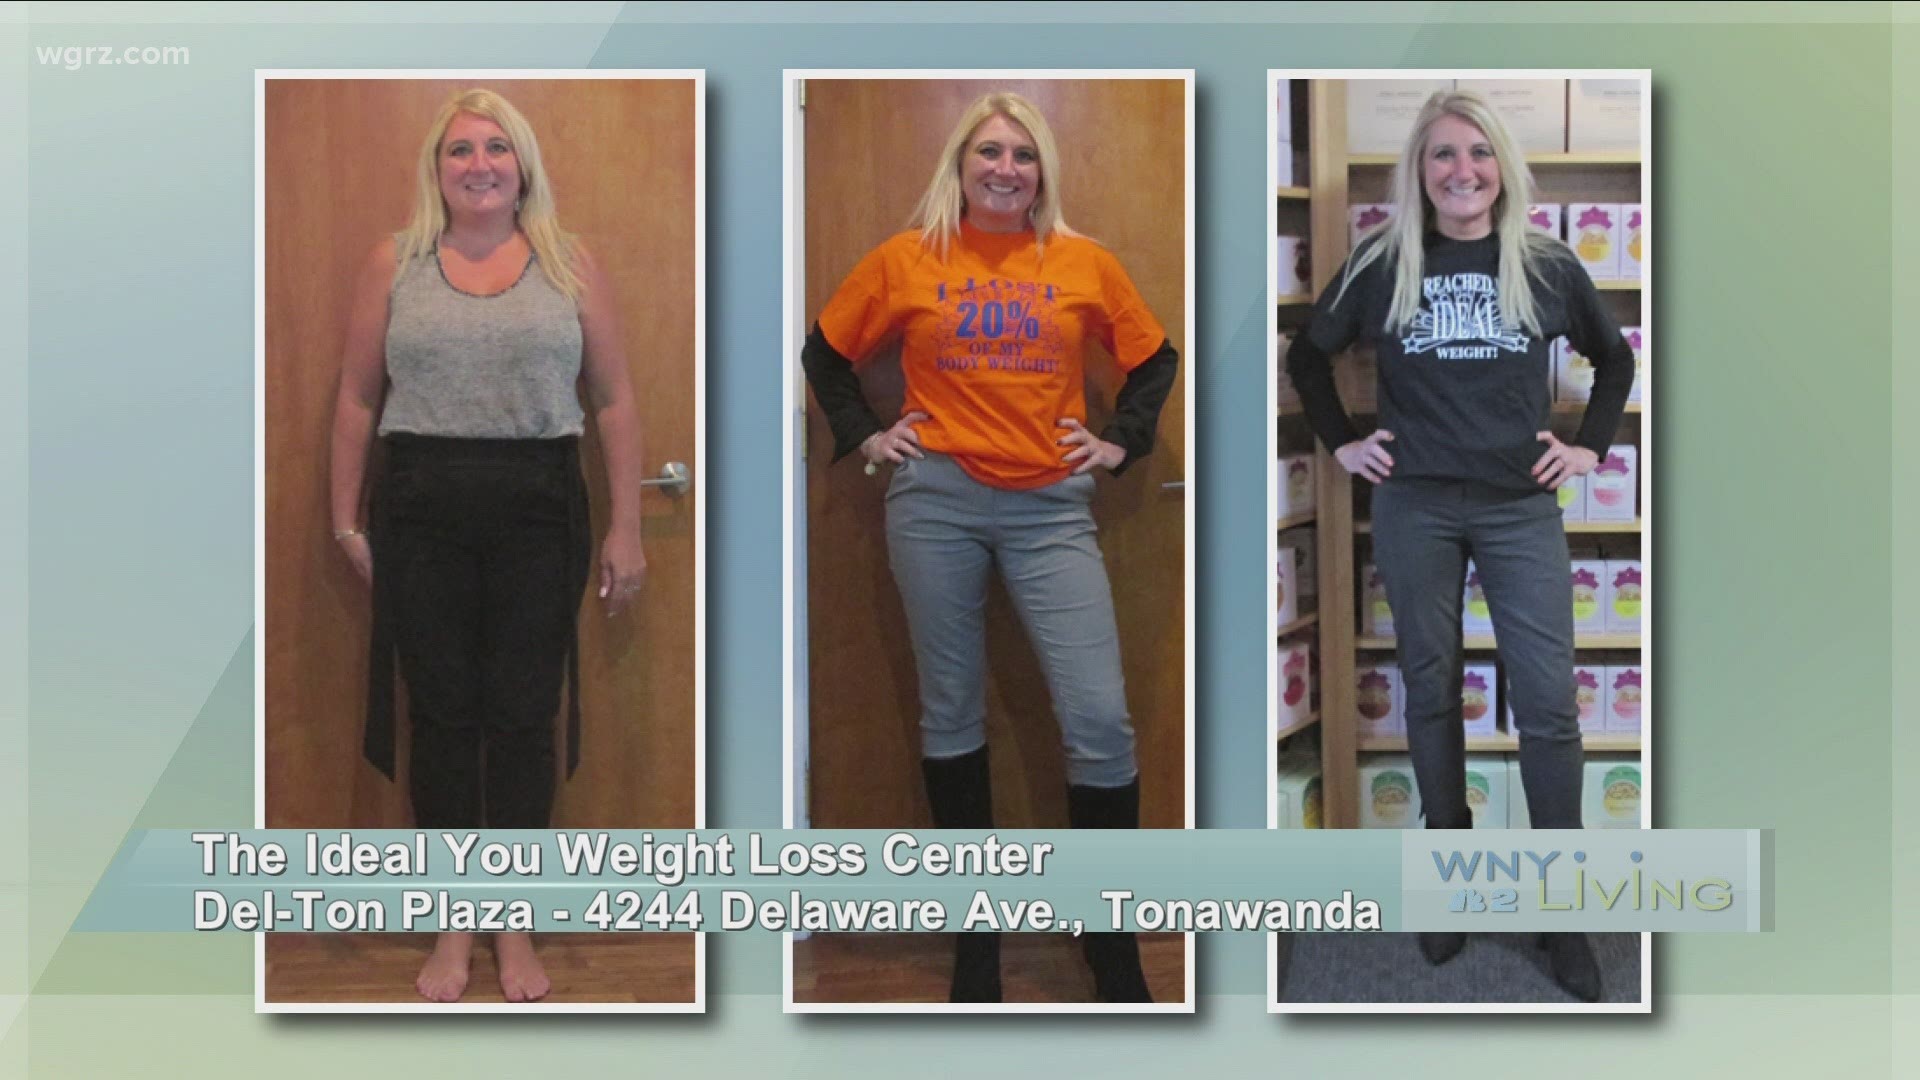 WNY Living - April 3 - The Ideal You Weight Loss Center (THIS VIDEO IS SPONSORED BY THE IDEAL YOU WEIGHT LOSS CENTER)